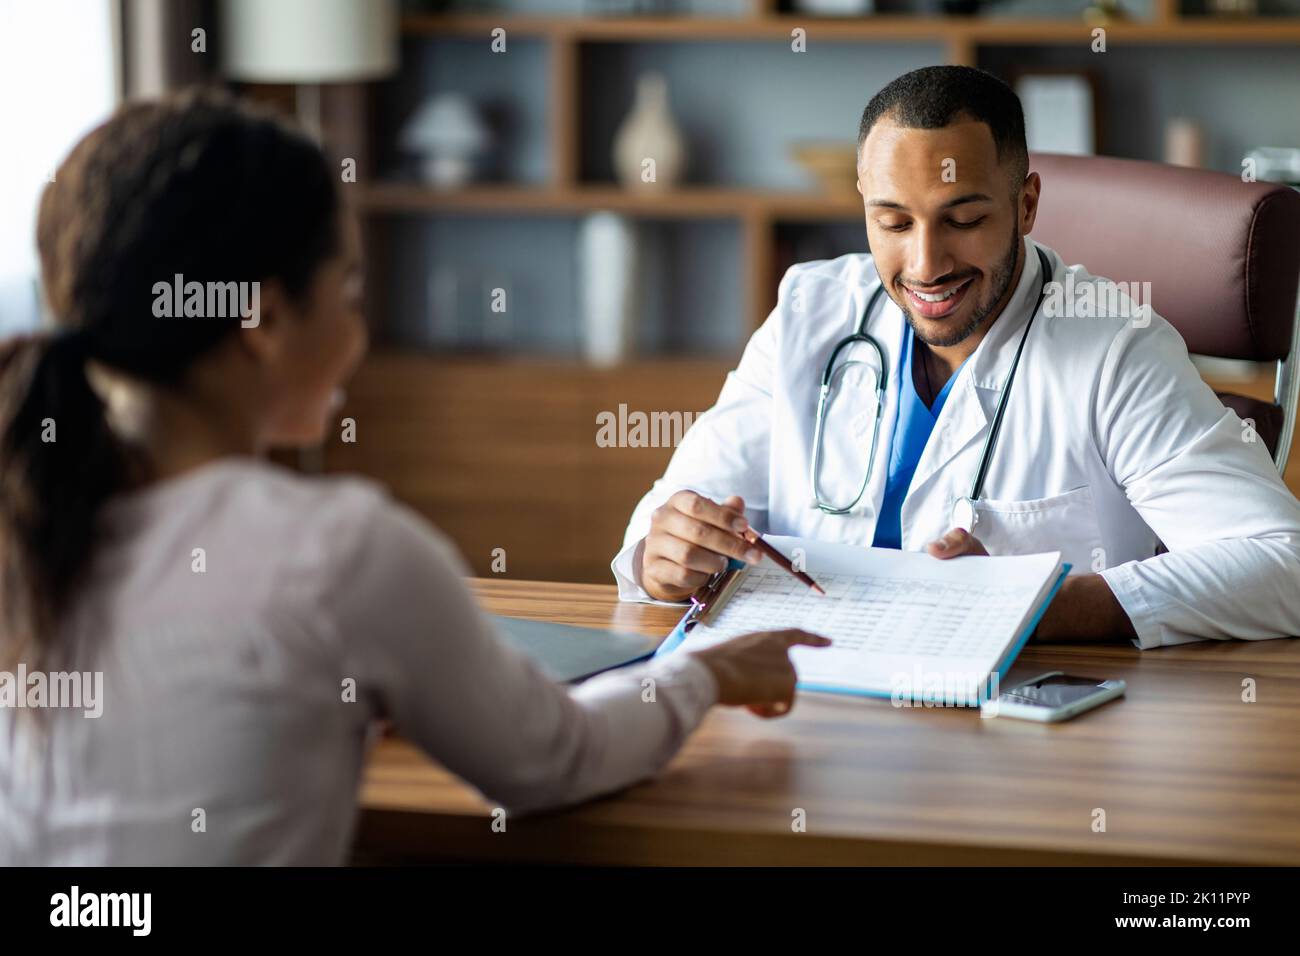 Handsome african american doctor showing patient treatment plan Stock Photo